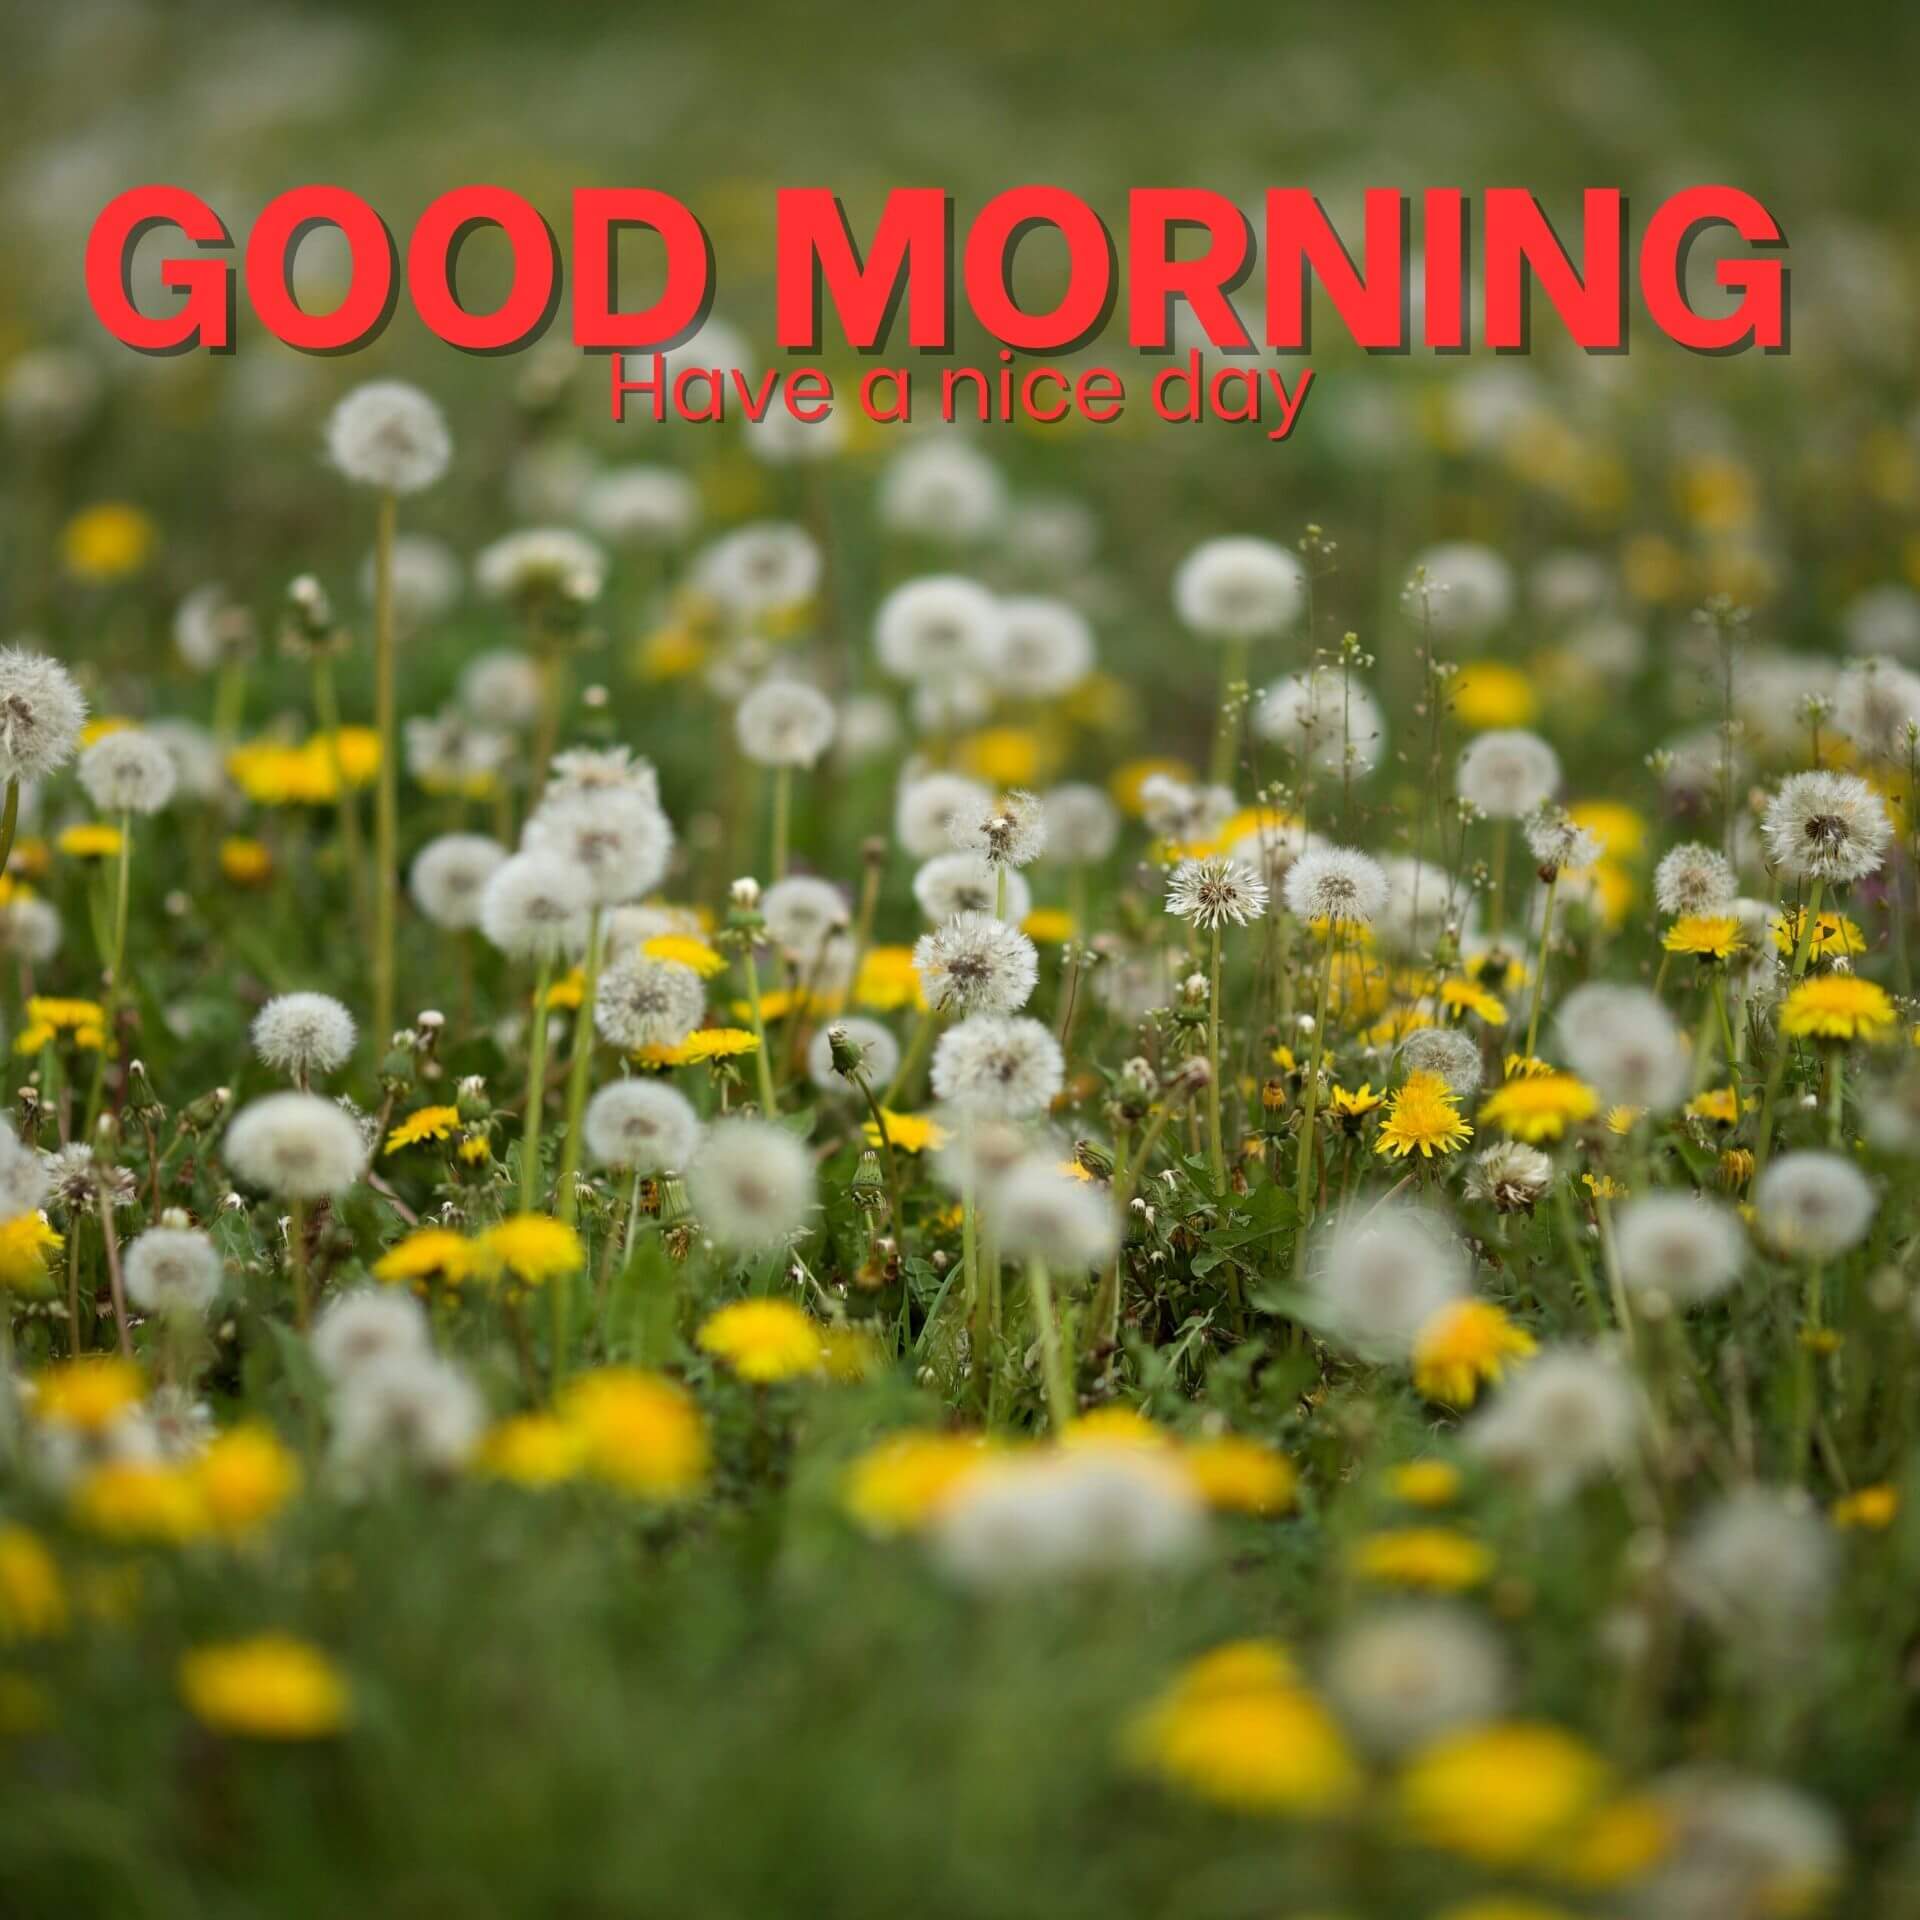 Good morning have a nice day Wallpaper Free Download